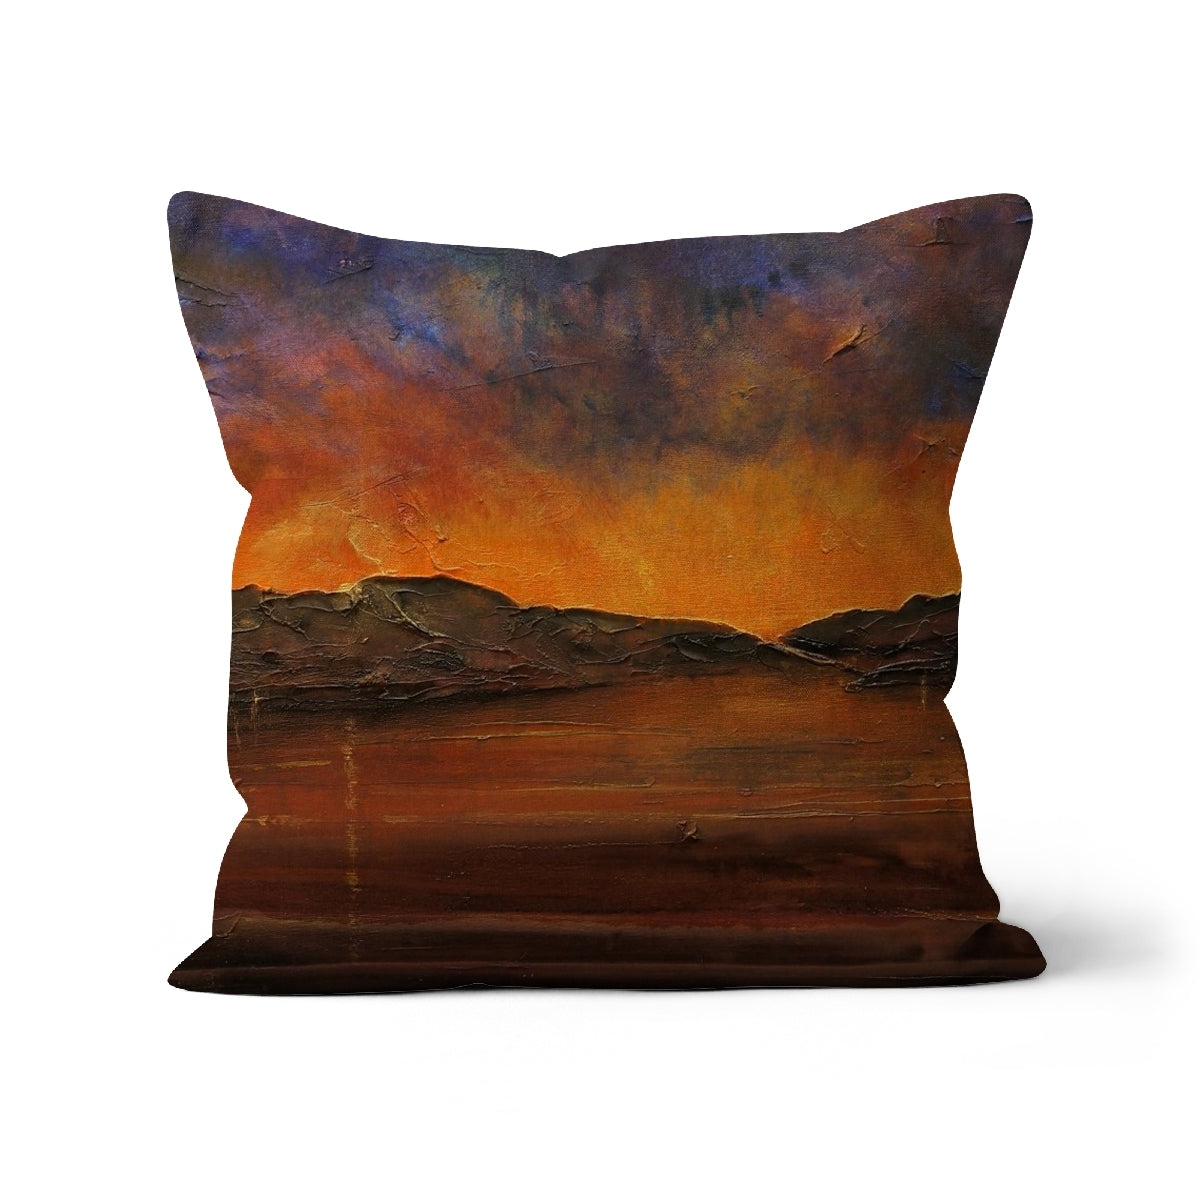 A Brooding Clyde Dusk Art Gifts Cushion-Cushions-River Clyde Art Gallery-Canvas-18"x18"-Paintings, Prints, Homeware, Art Gifts From Scotland By Scottish Artist Kevin Hunter